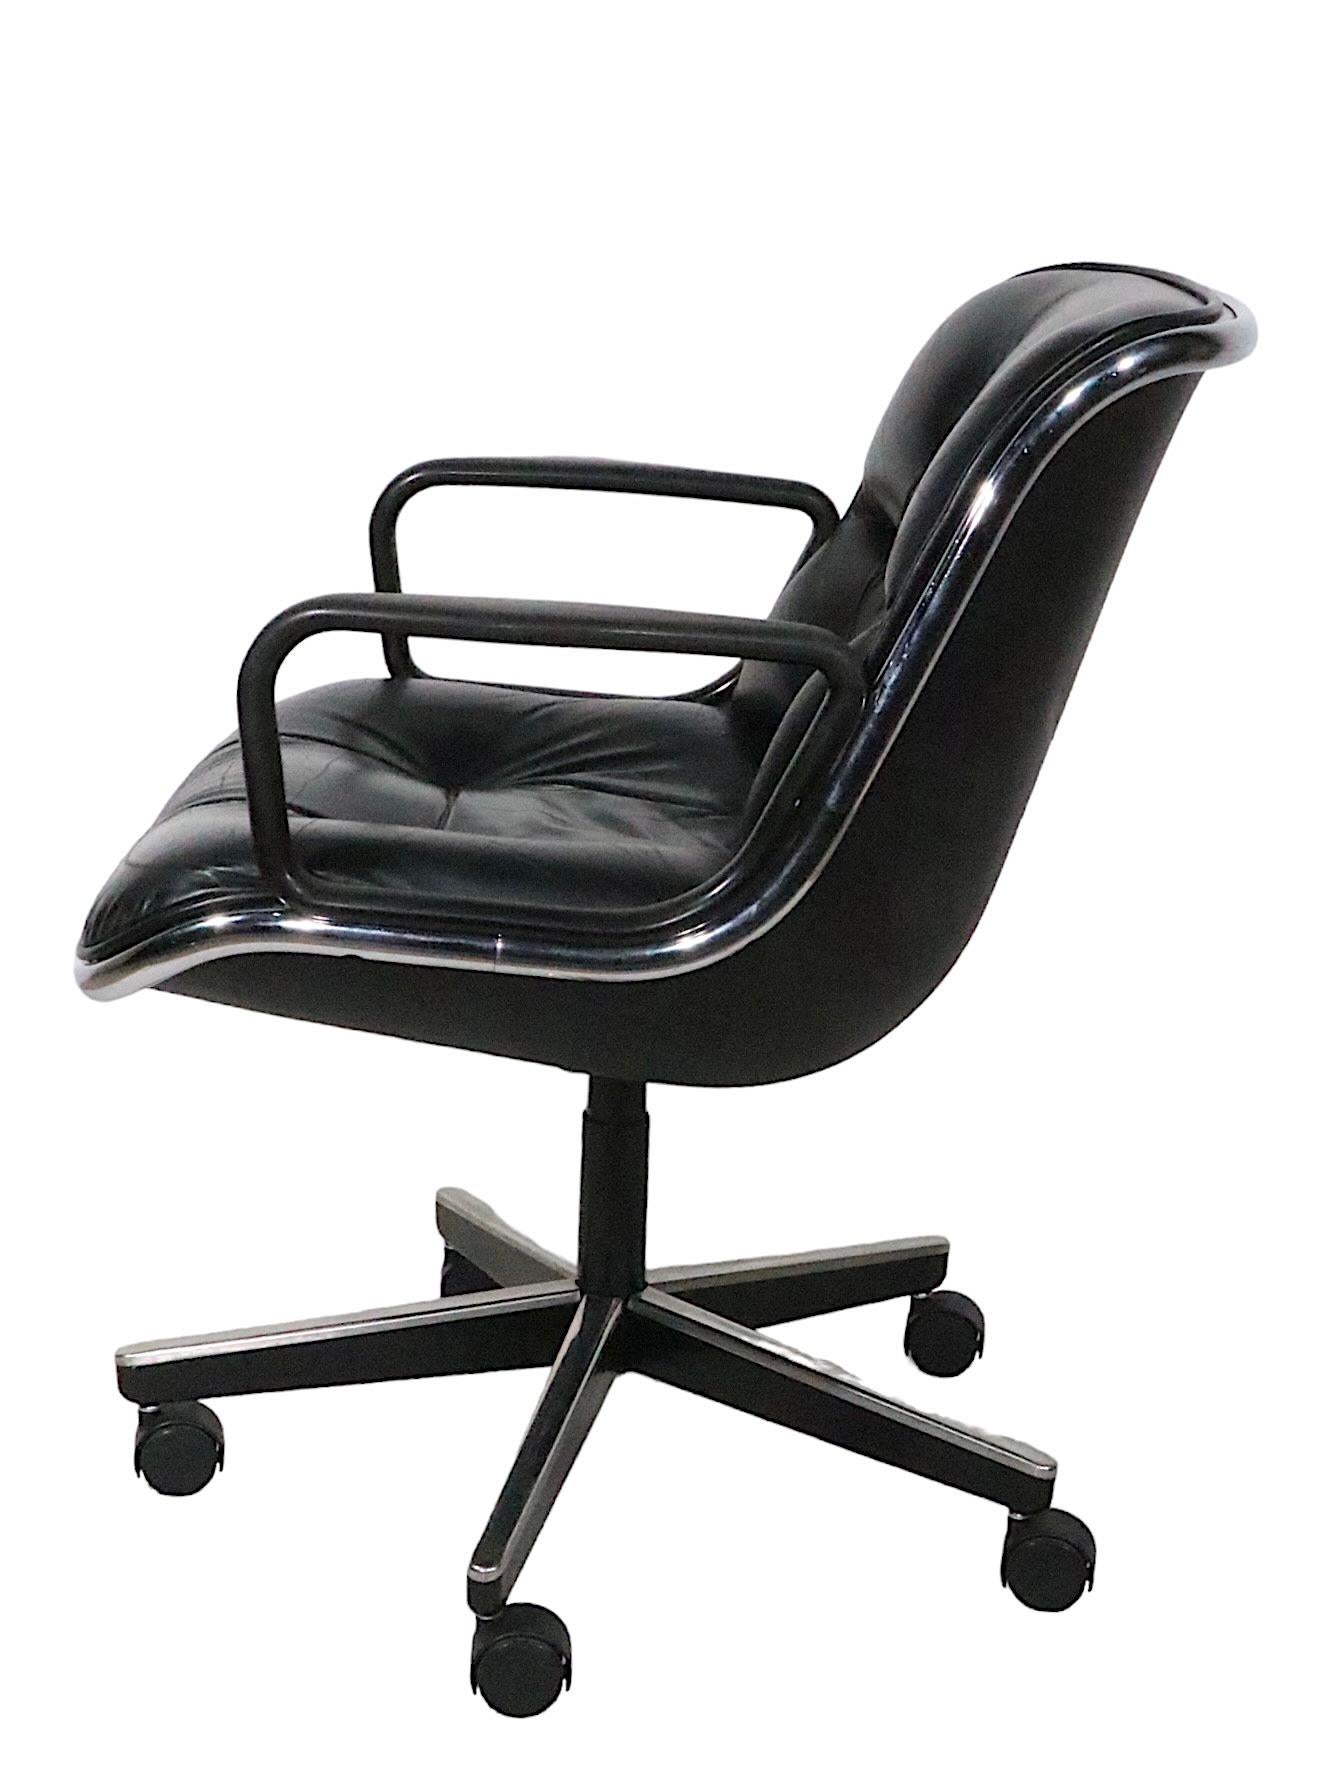 5 Knoll Swivel Tilt Office Chairs Designed by Charles Pollock for Knoll c 1960's For Sale 11